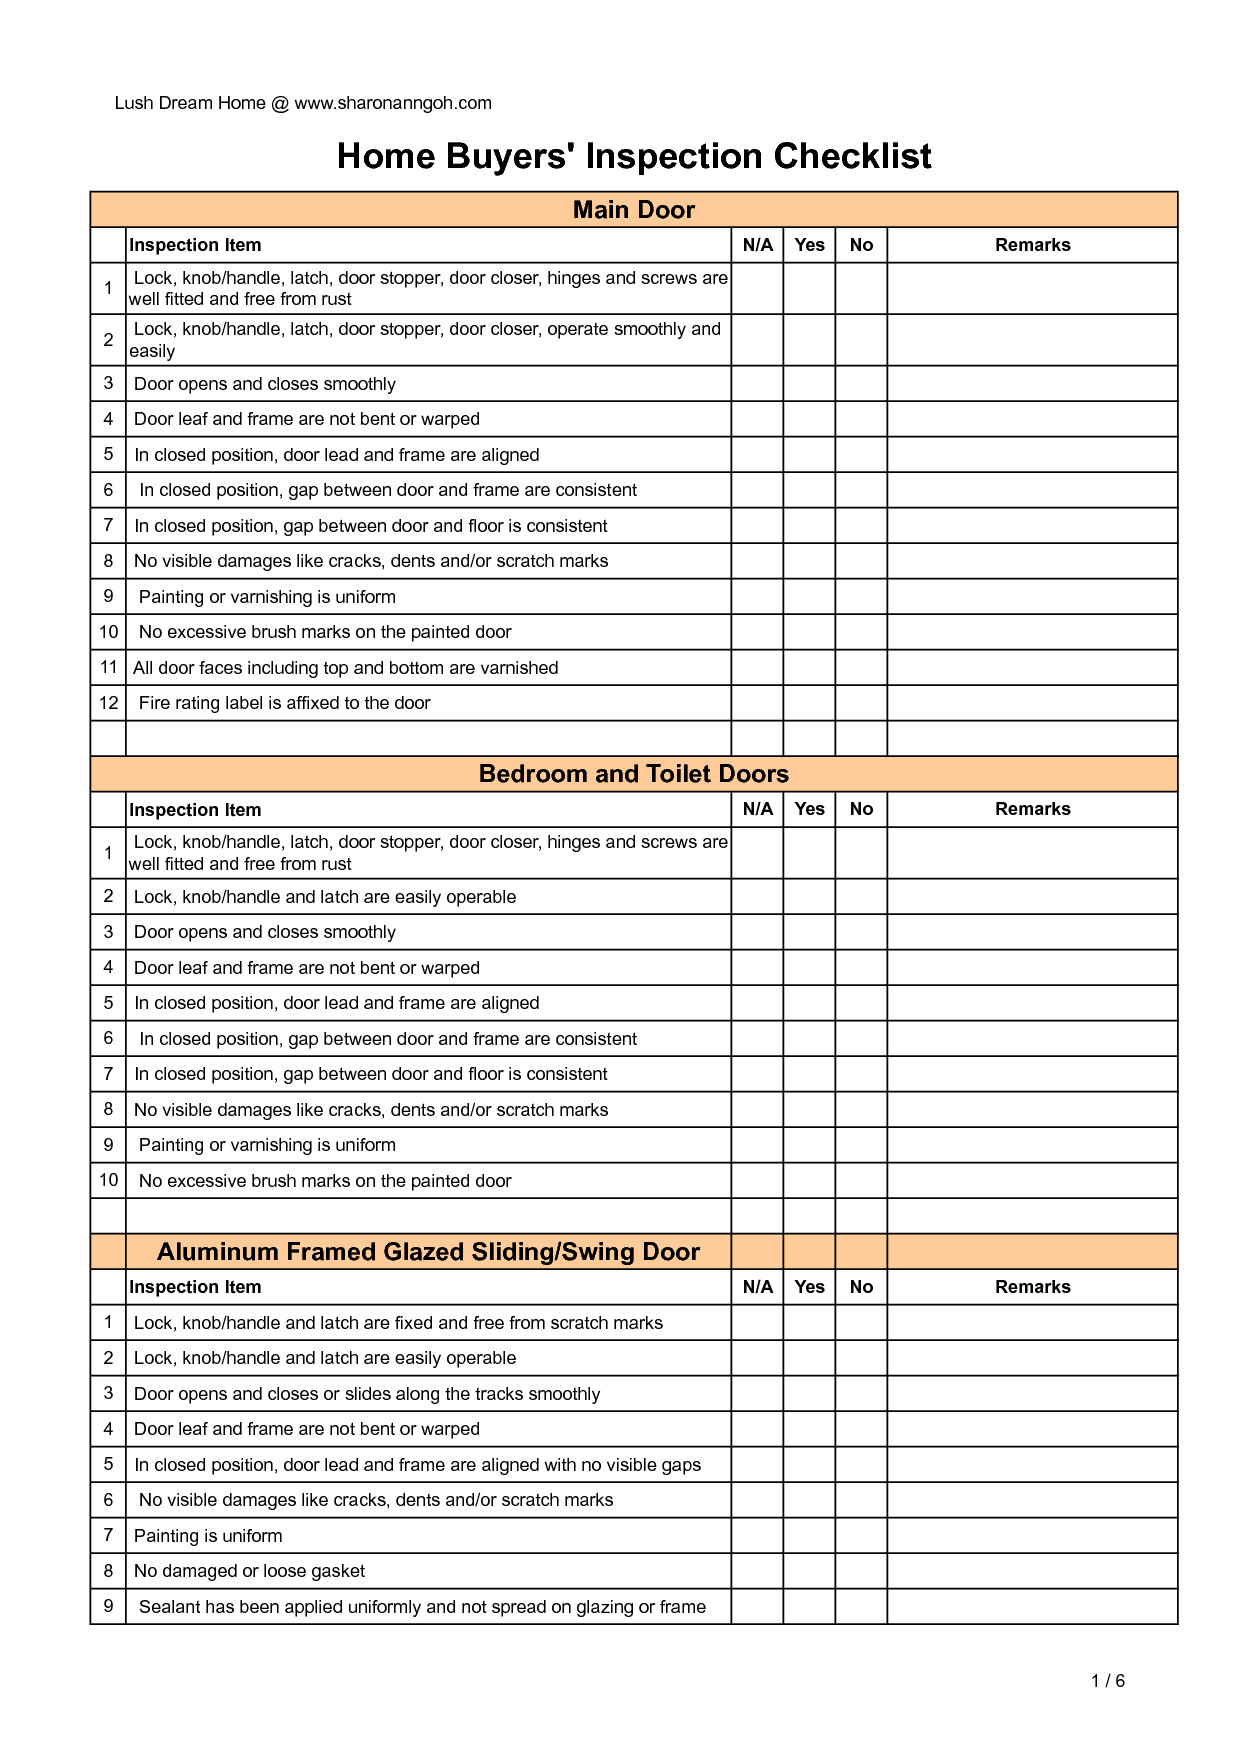 Home Building Checklist Template Creating A Home Inspection Checklist Using Microsoft Excel